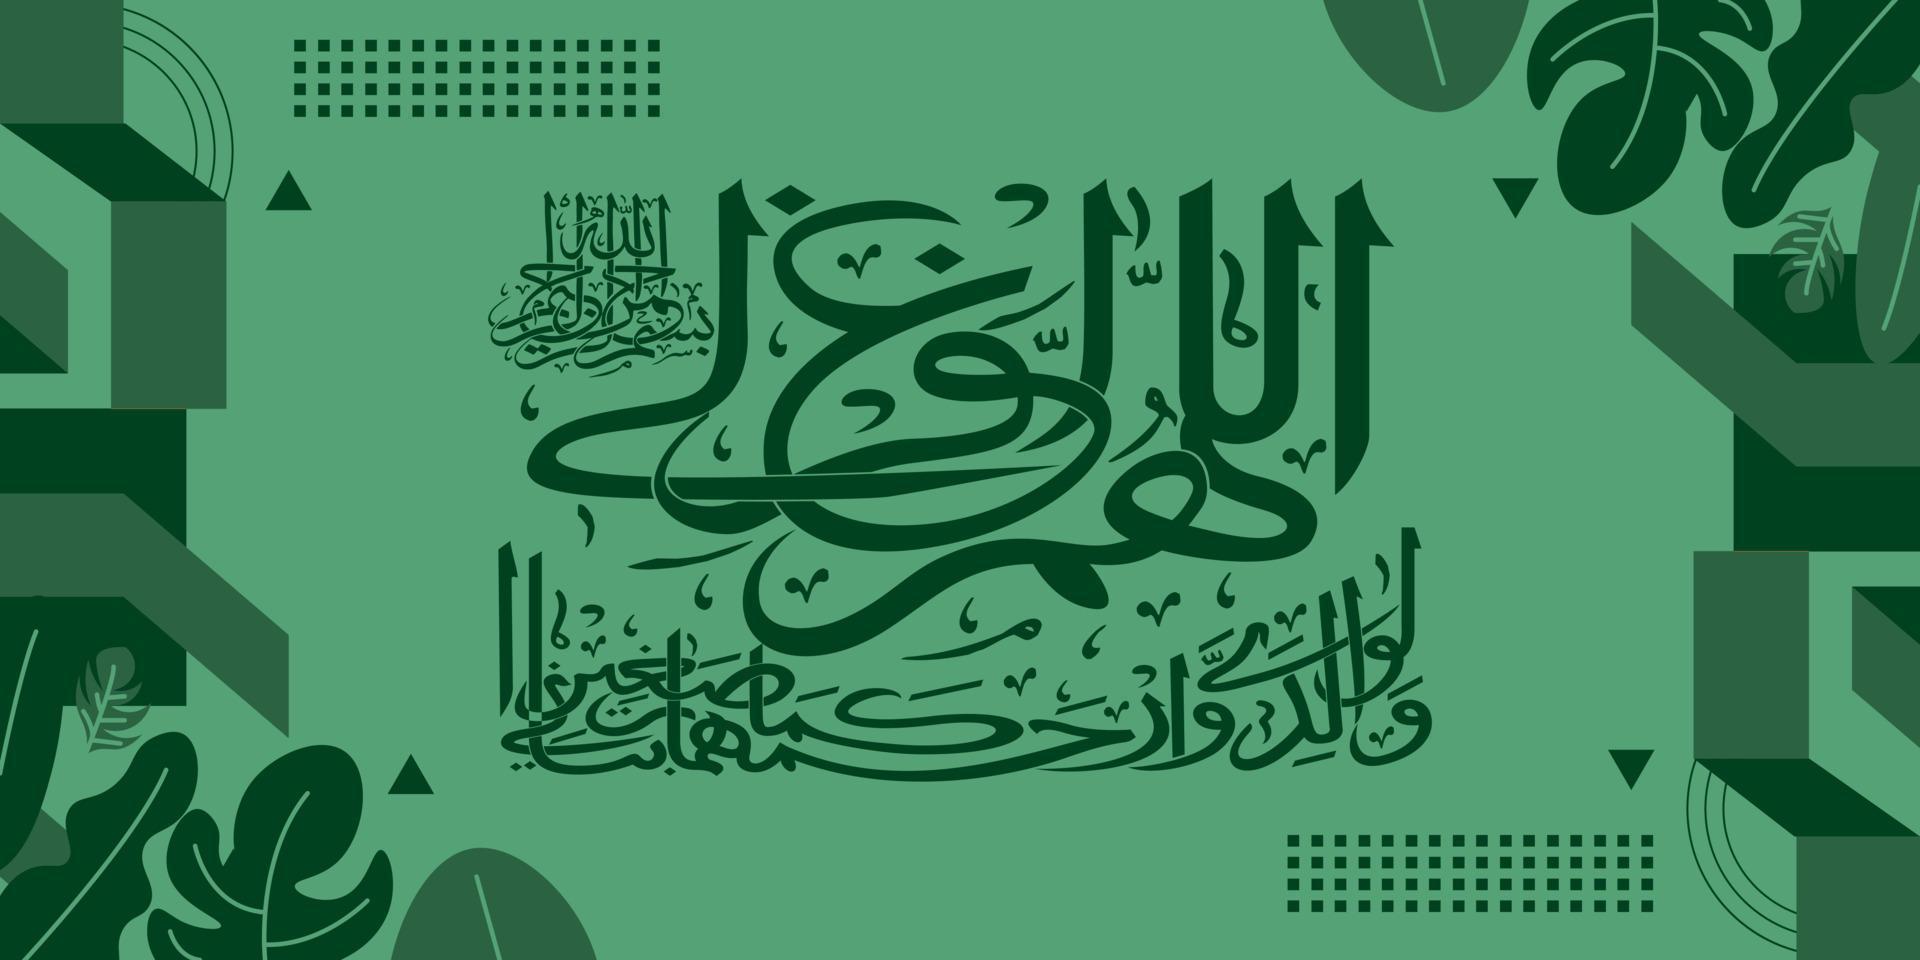 vector illustration of arabic calligraphy on green background